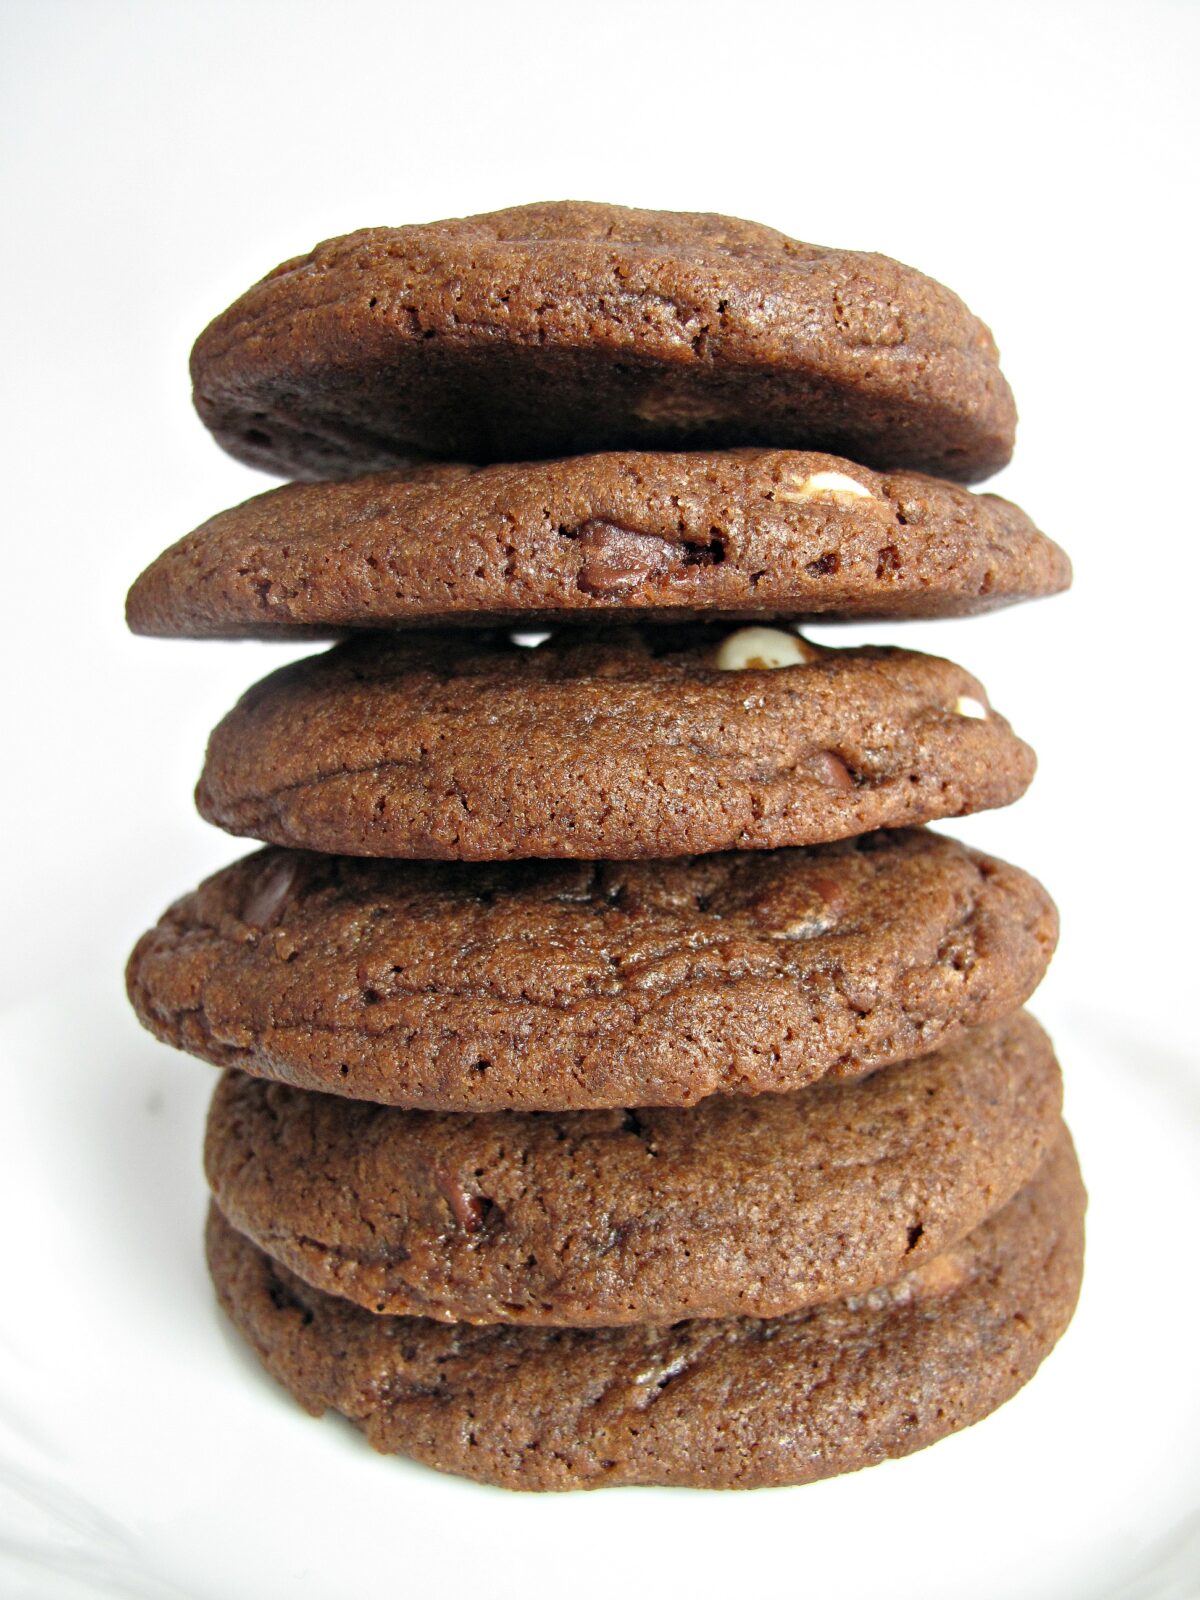 Stack of six chocolate cookies.